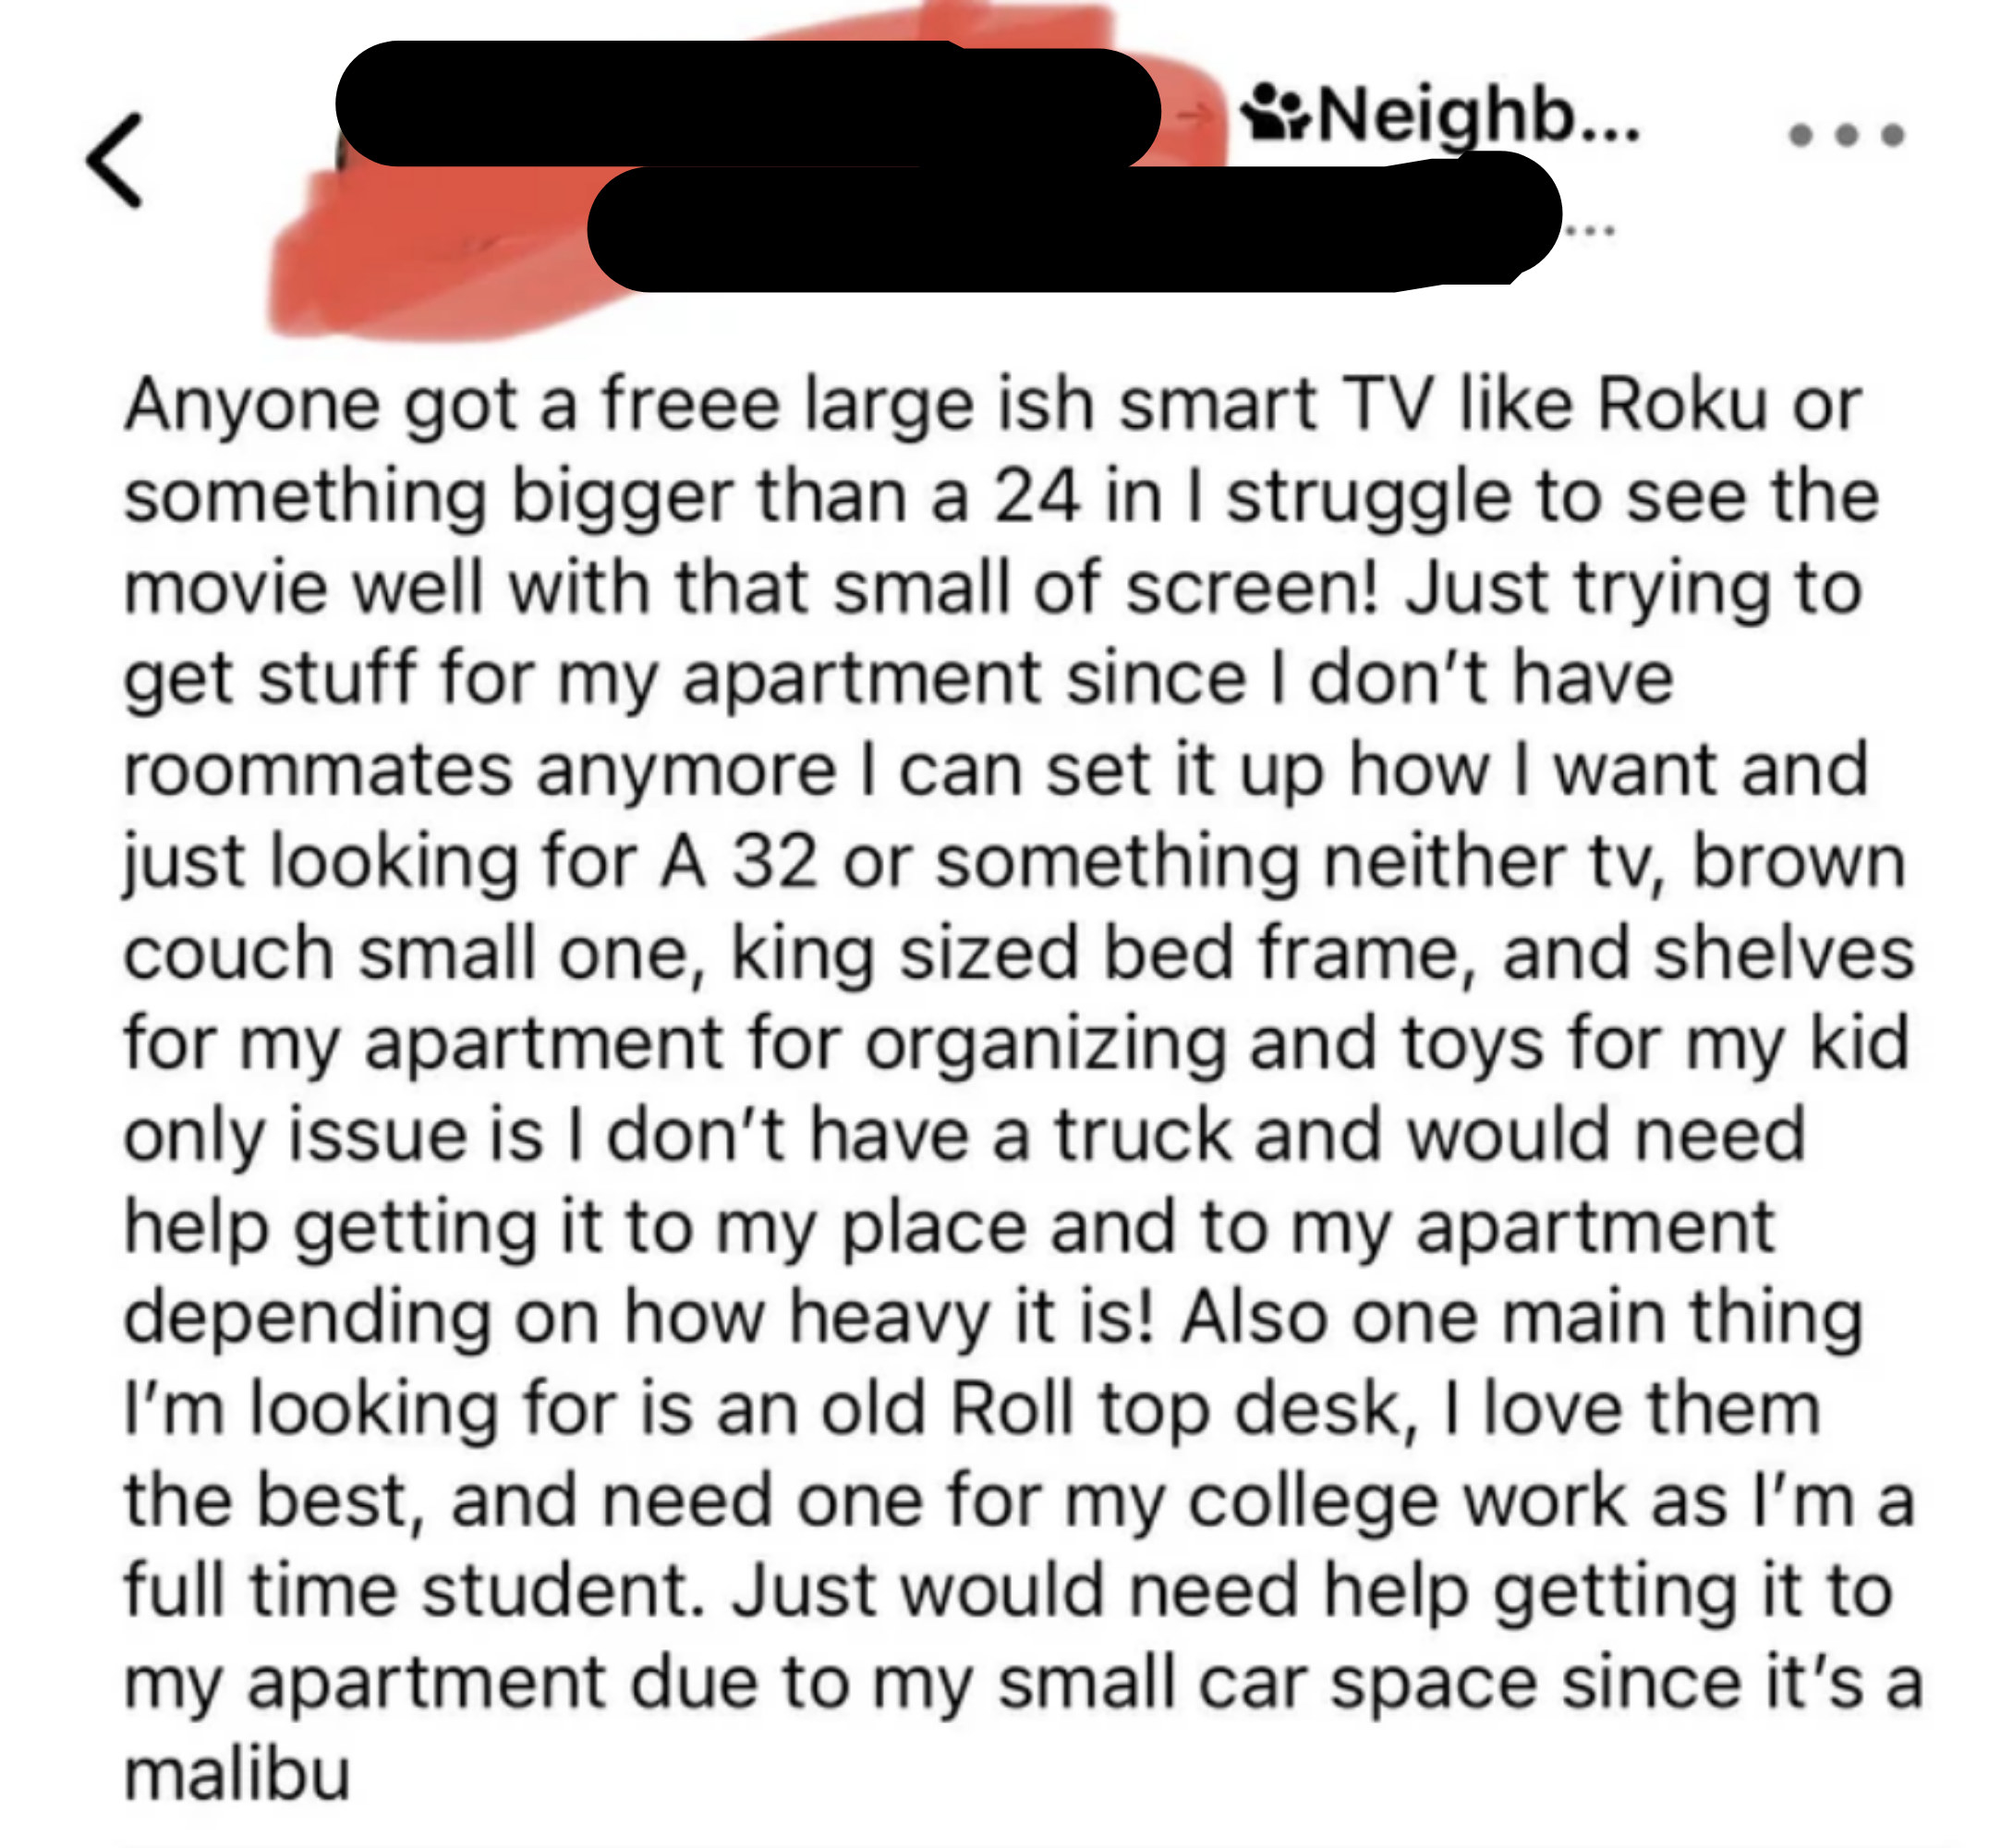 A person asking for free furniture